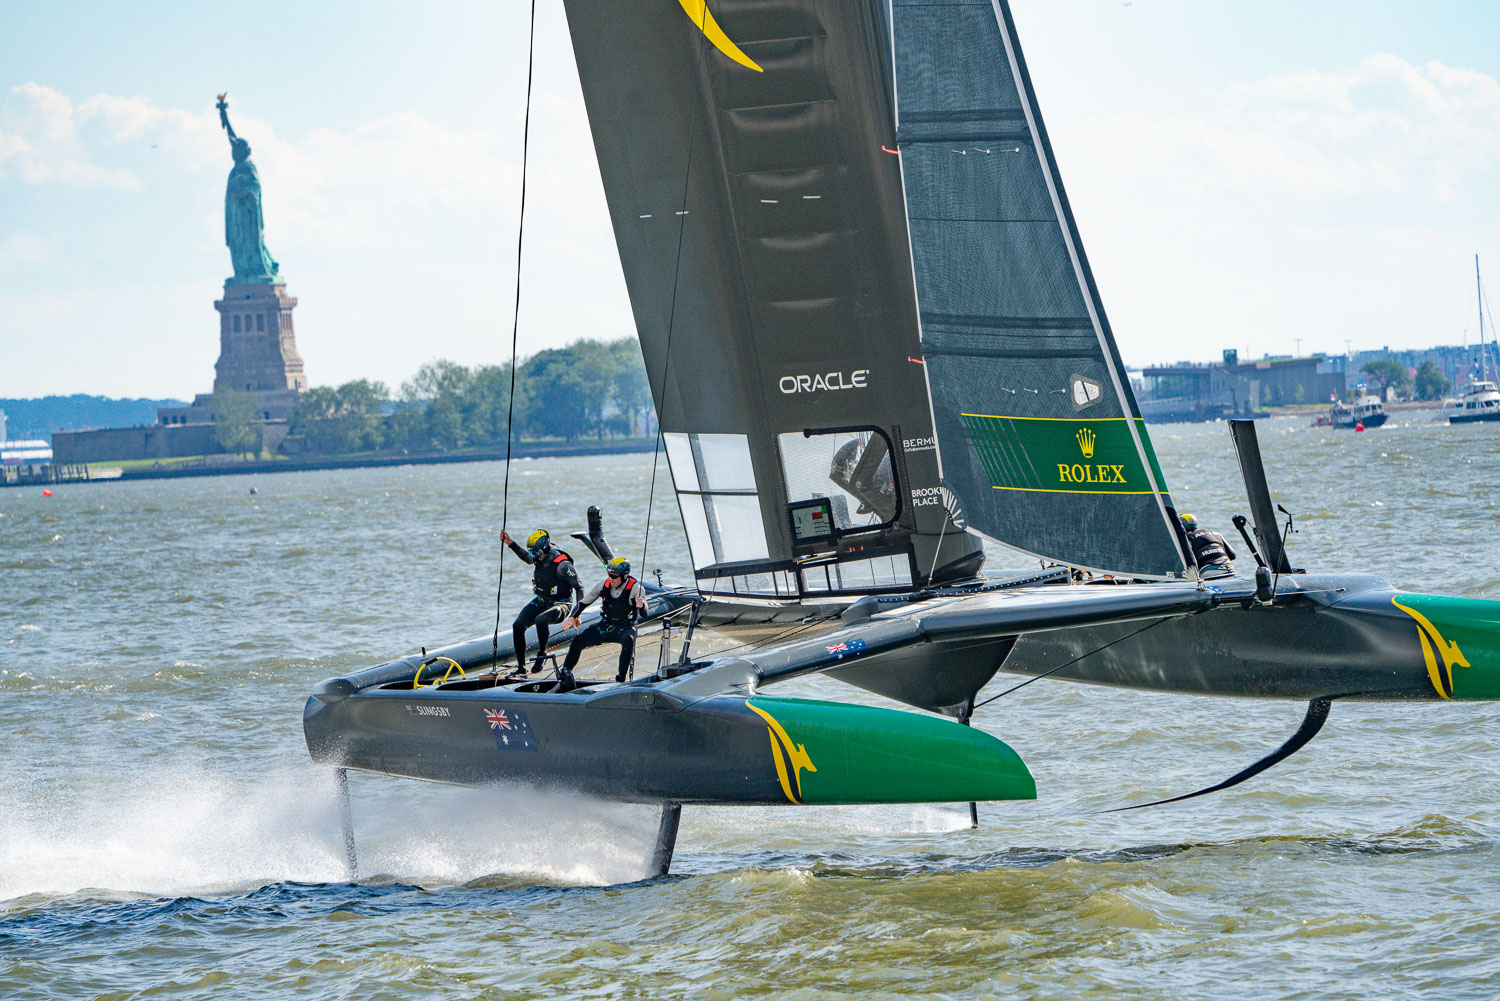 The crew of GB dancing around the deck of this Sail GP boat as shes riding her hydrofoils. The statue of liberty is in the background. Hudson river..jpg